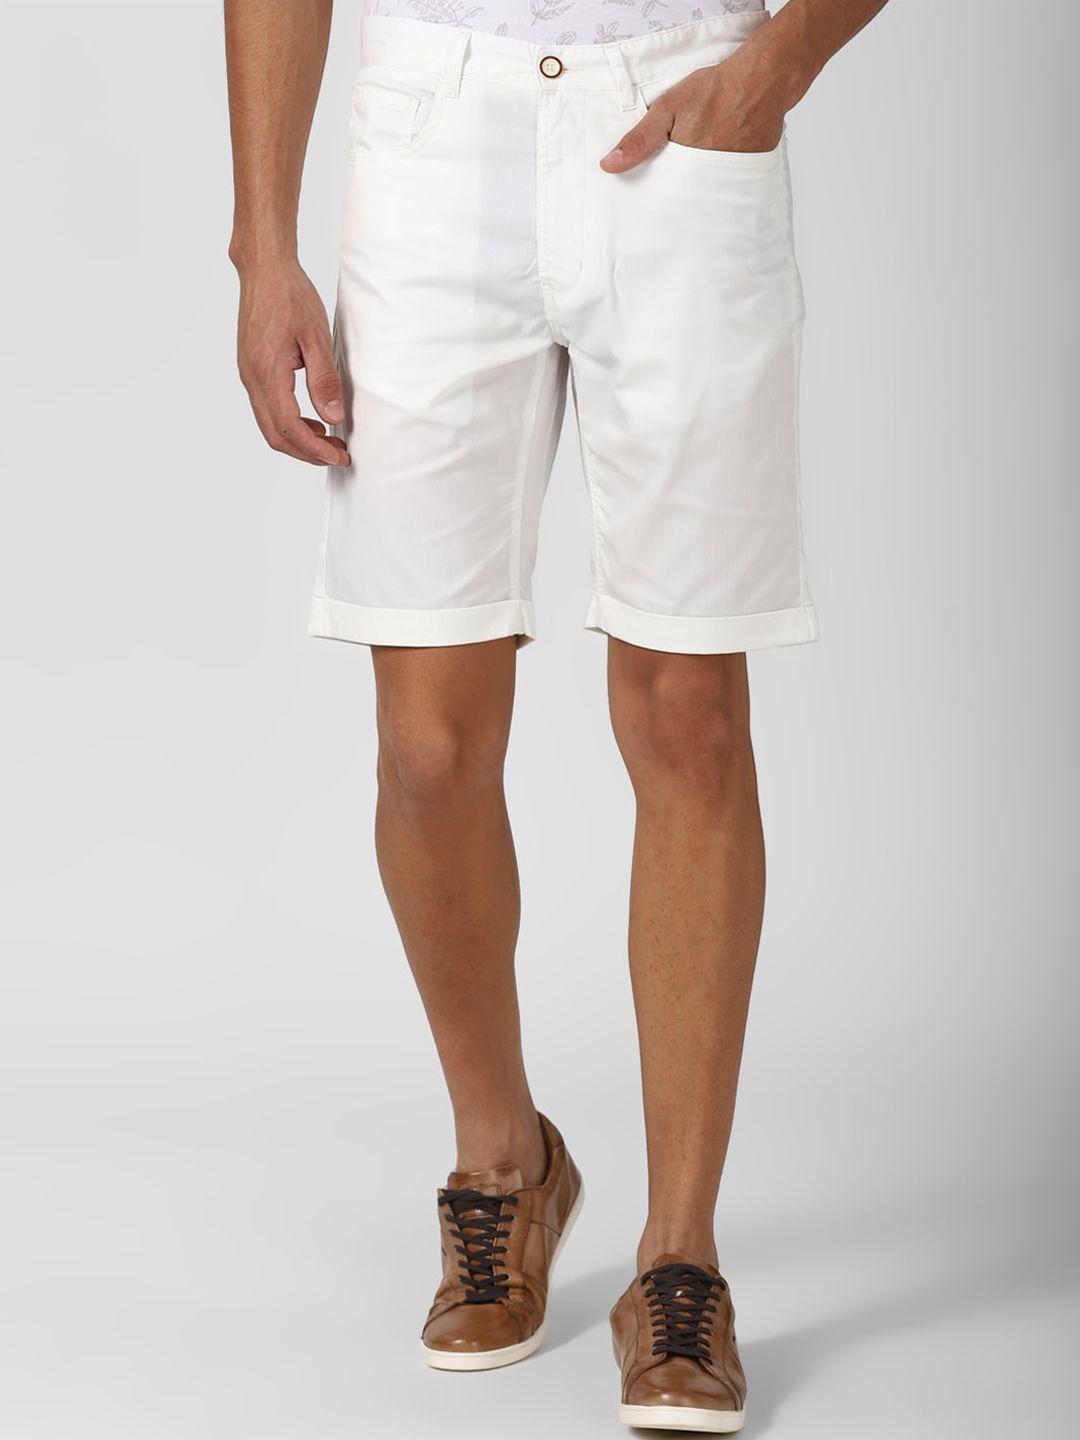 peter england casuals men white shorts